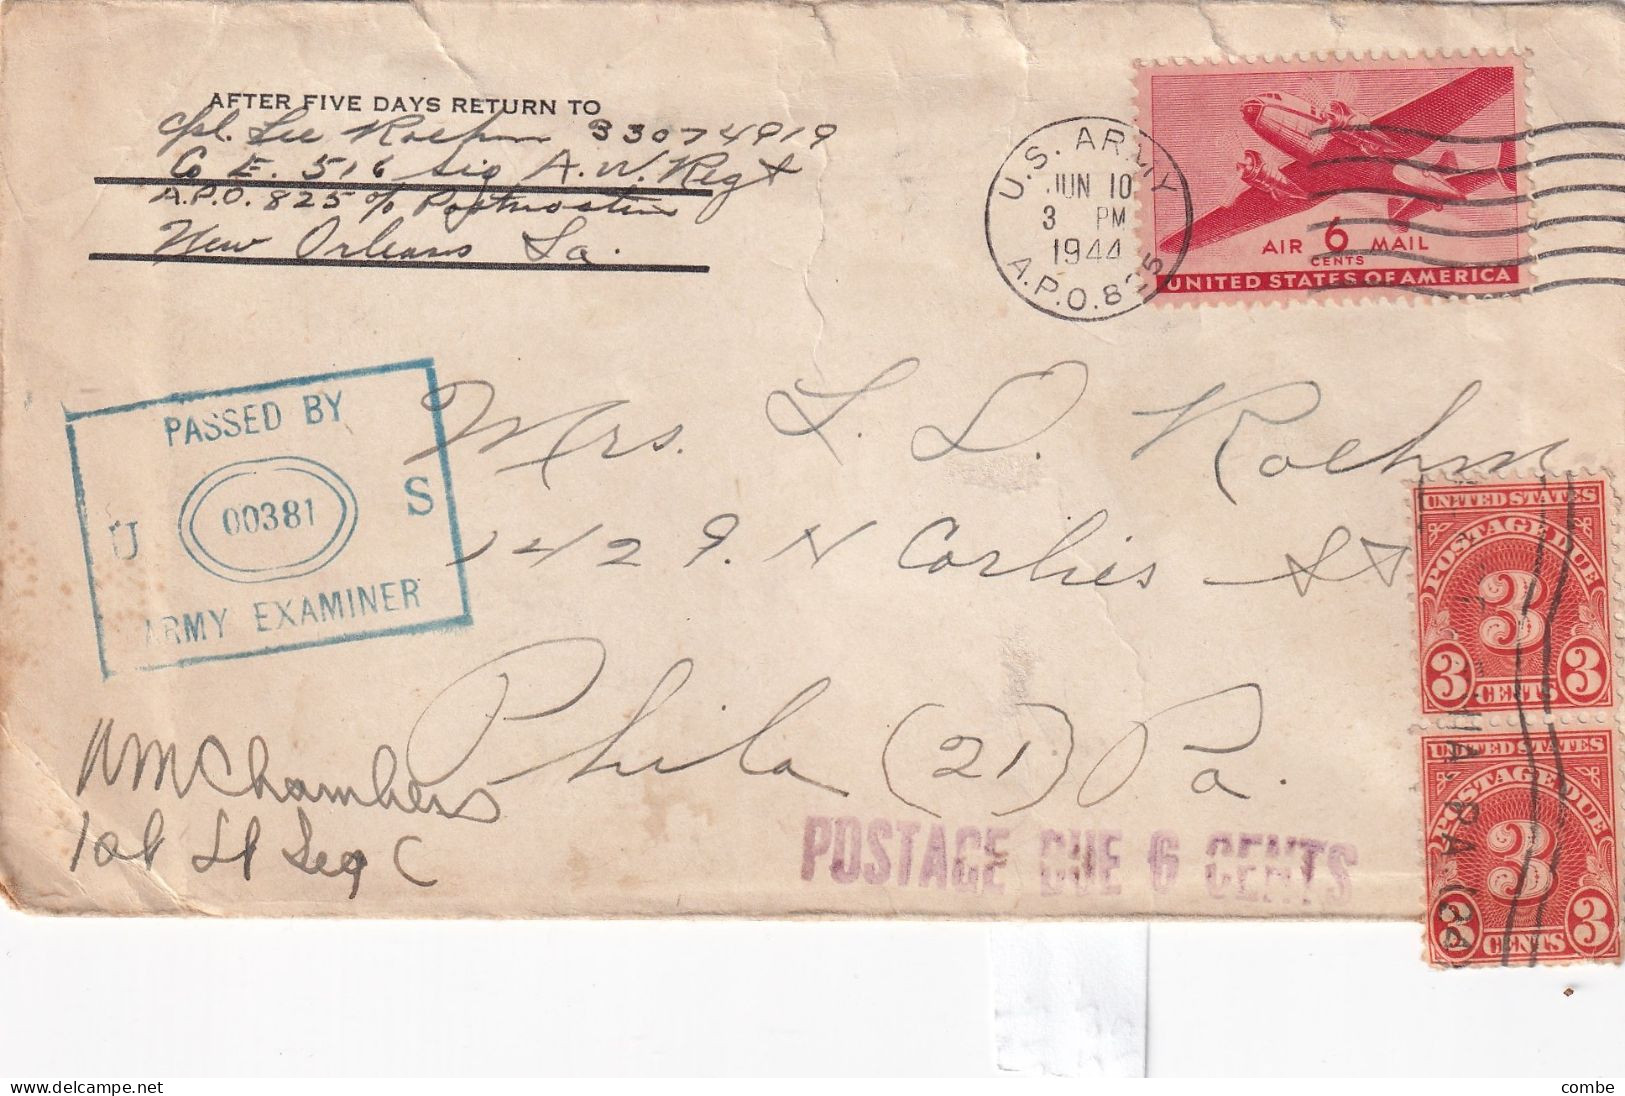 COVER US. 3 JUN 1944. APO 825. ALBROOK FIELD. CANAL ZONE. TO PHILA. PASSED BY EXAMINER. POSTAGE DUE 6 CENTS - Briefe U. Dokumente